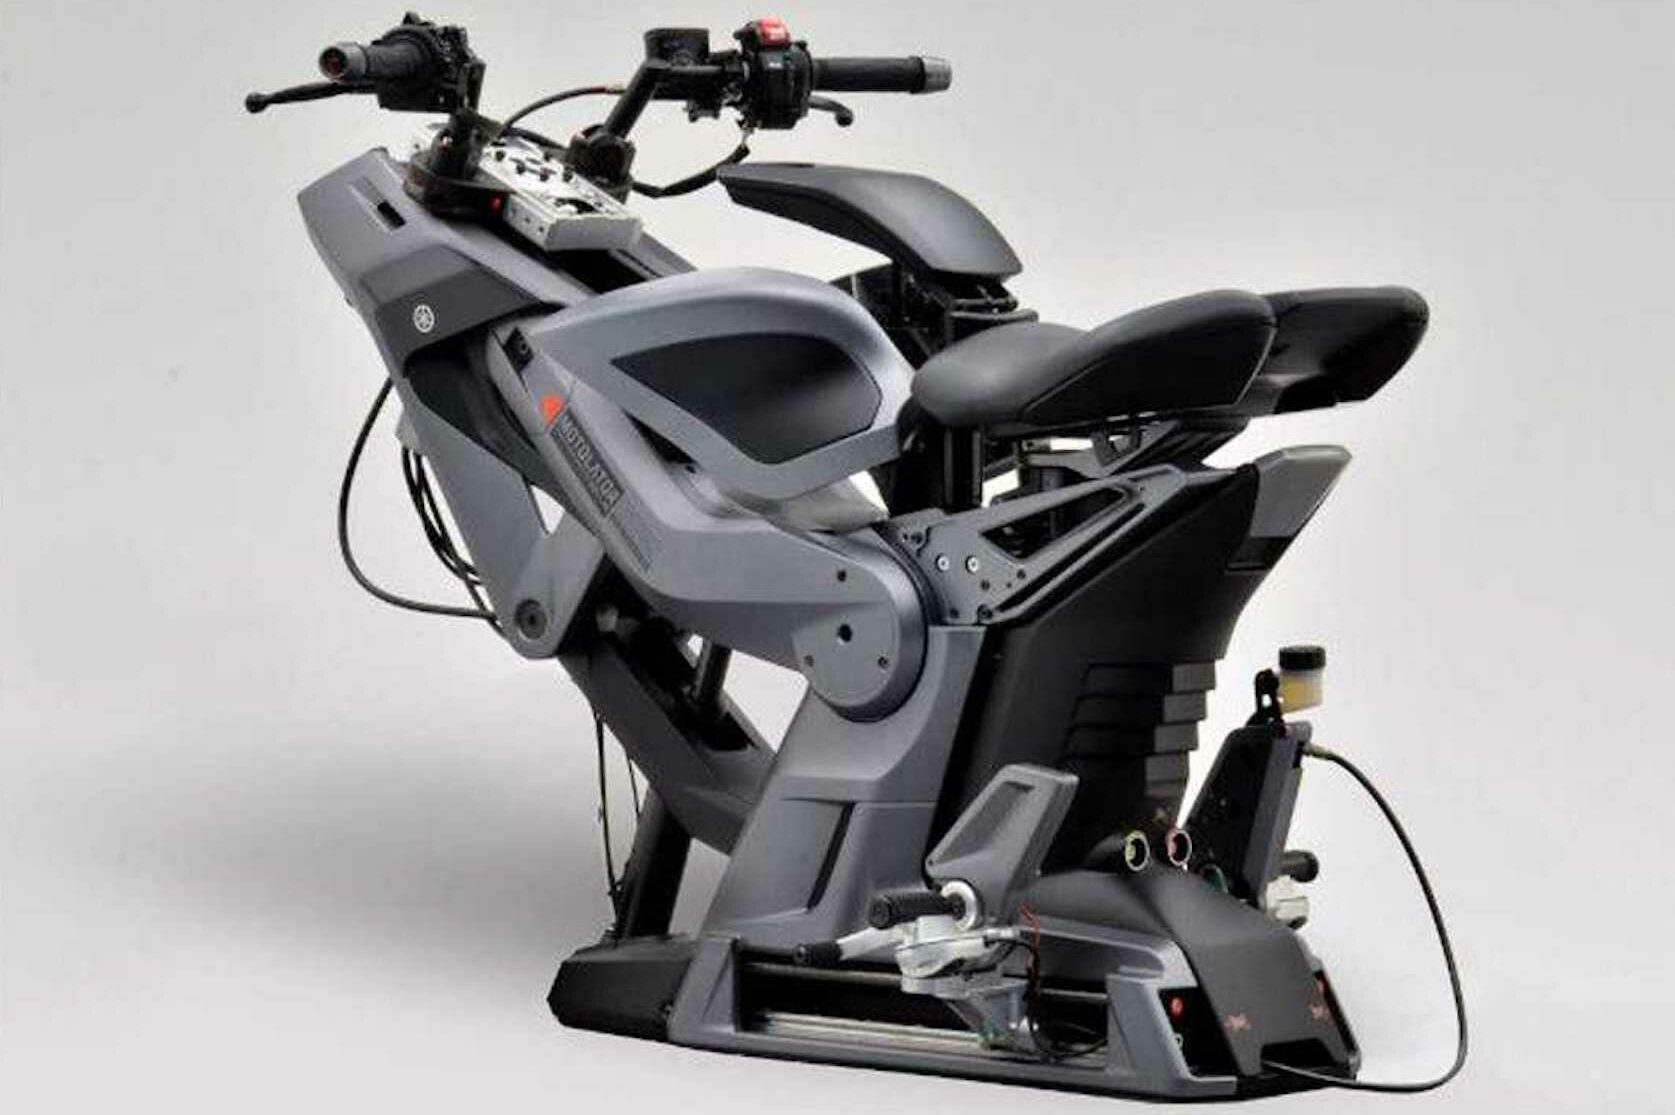 Yamaha's Motolator - a prototype designed to help riders find their perfect ergonomic for future production and track potential. Media sourced from RideApart.